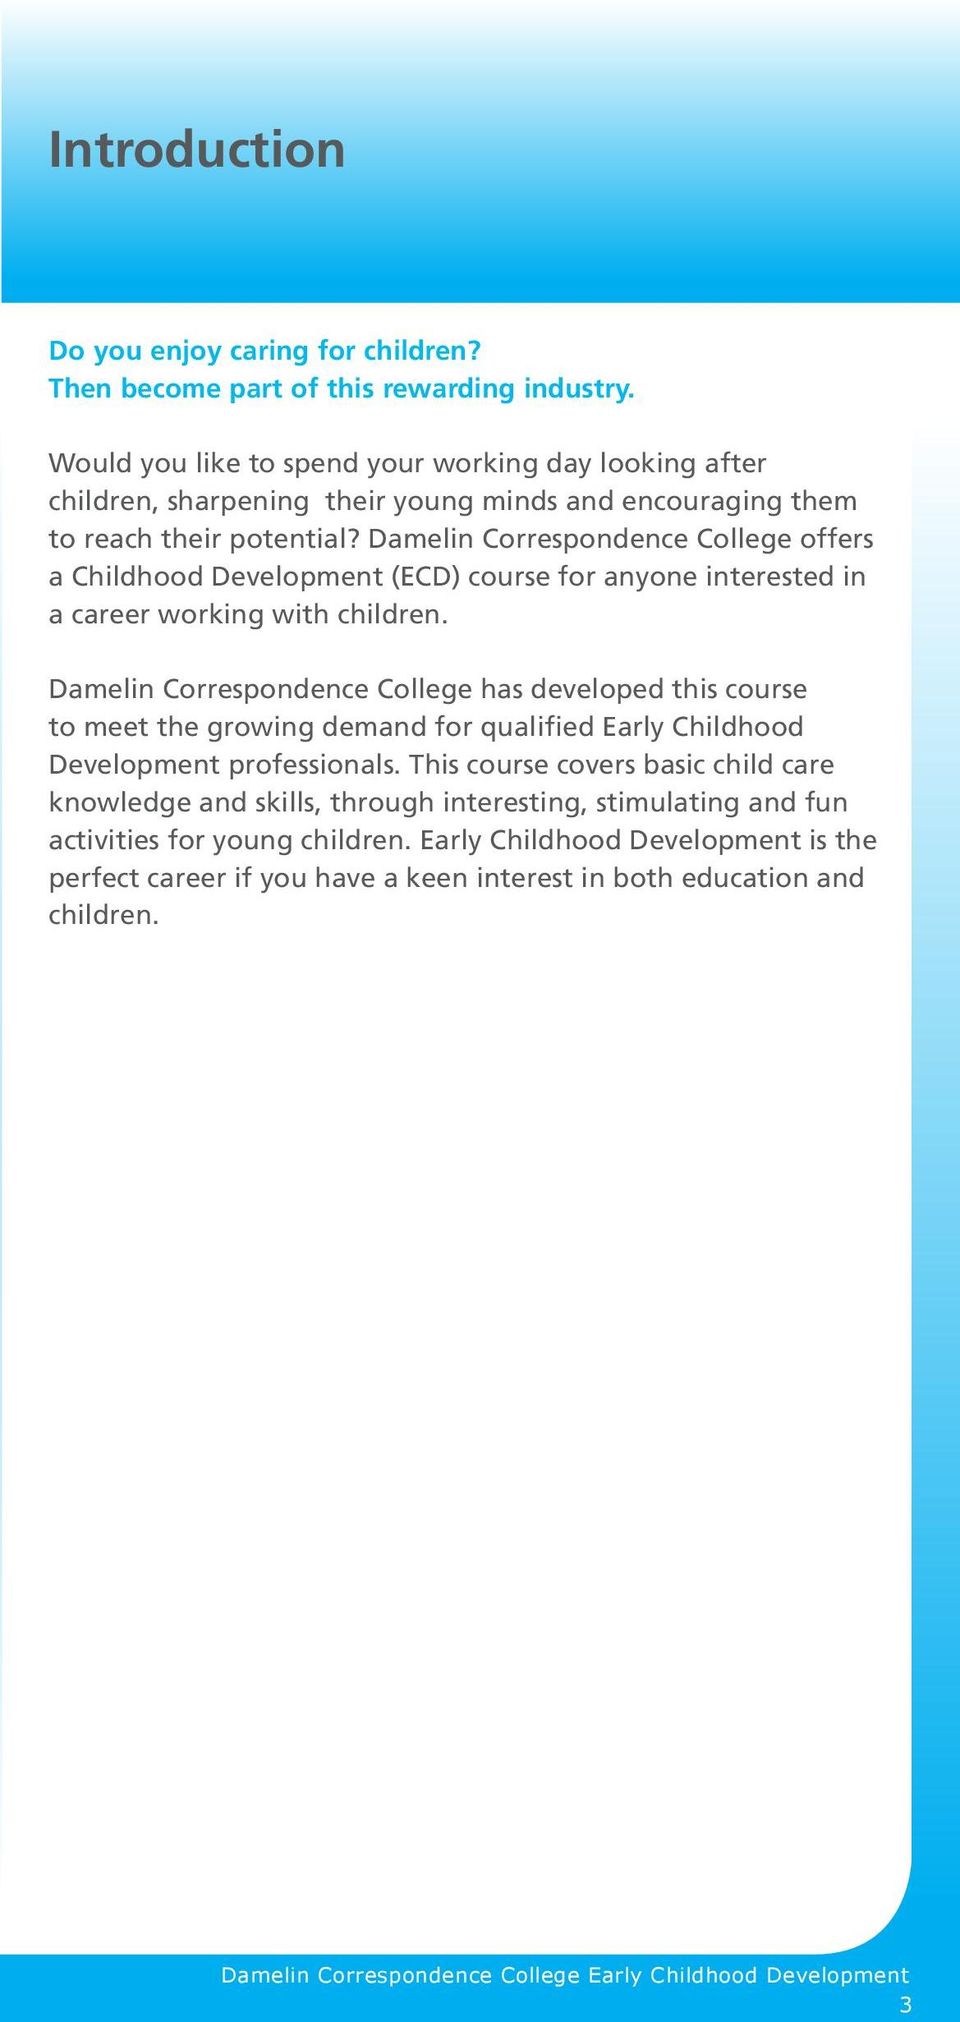 Damelin Correspondence College offers a Childhood Development (ECD) course for anyone interested in a career working with children.